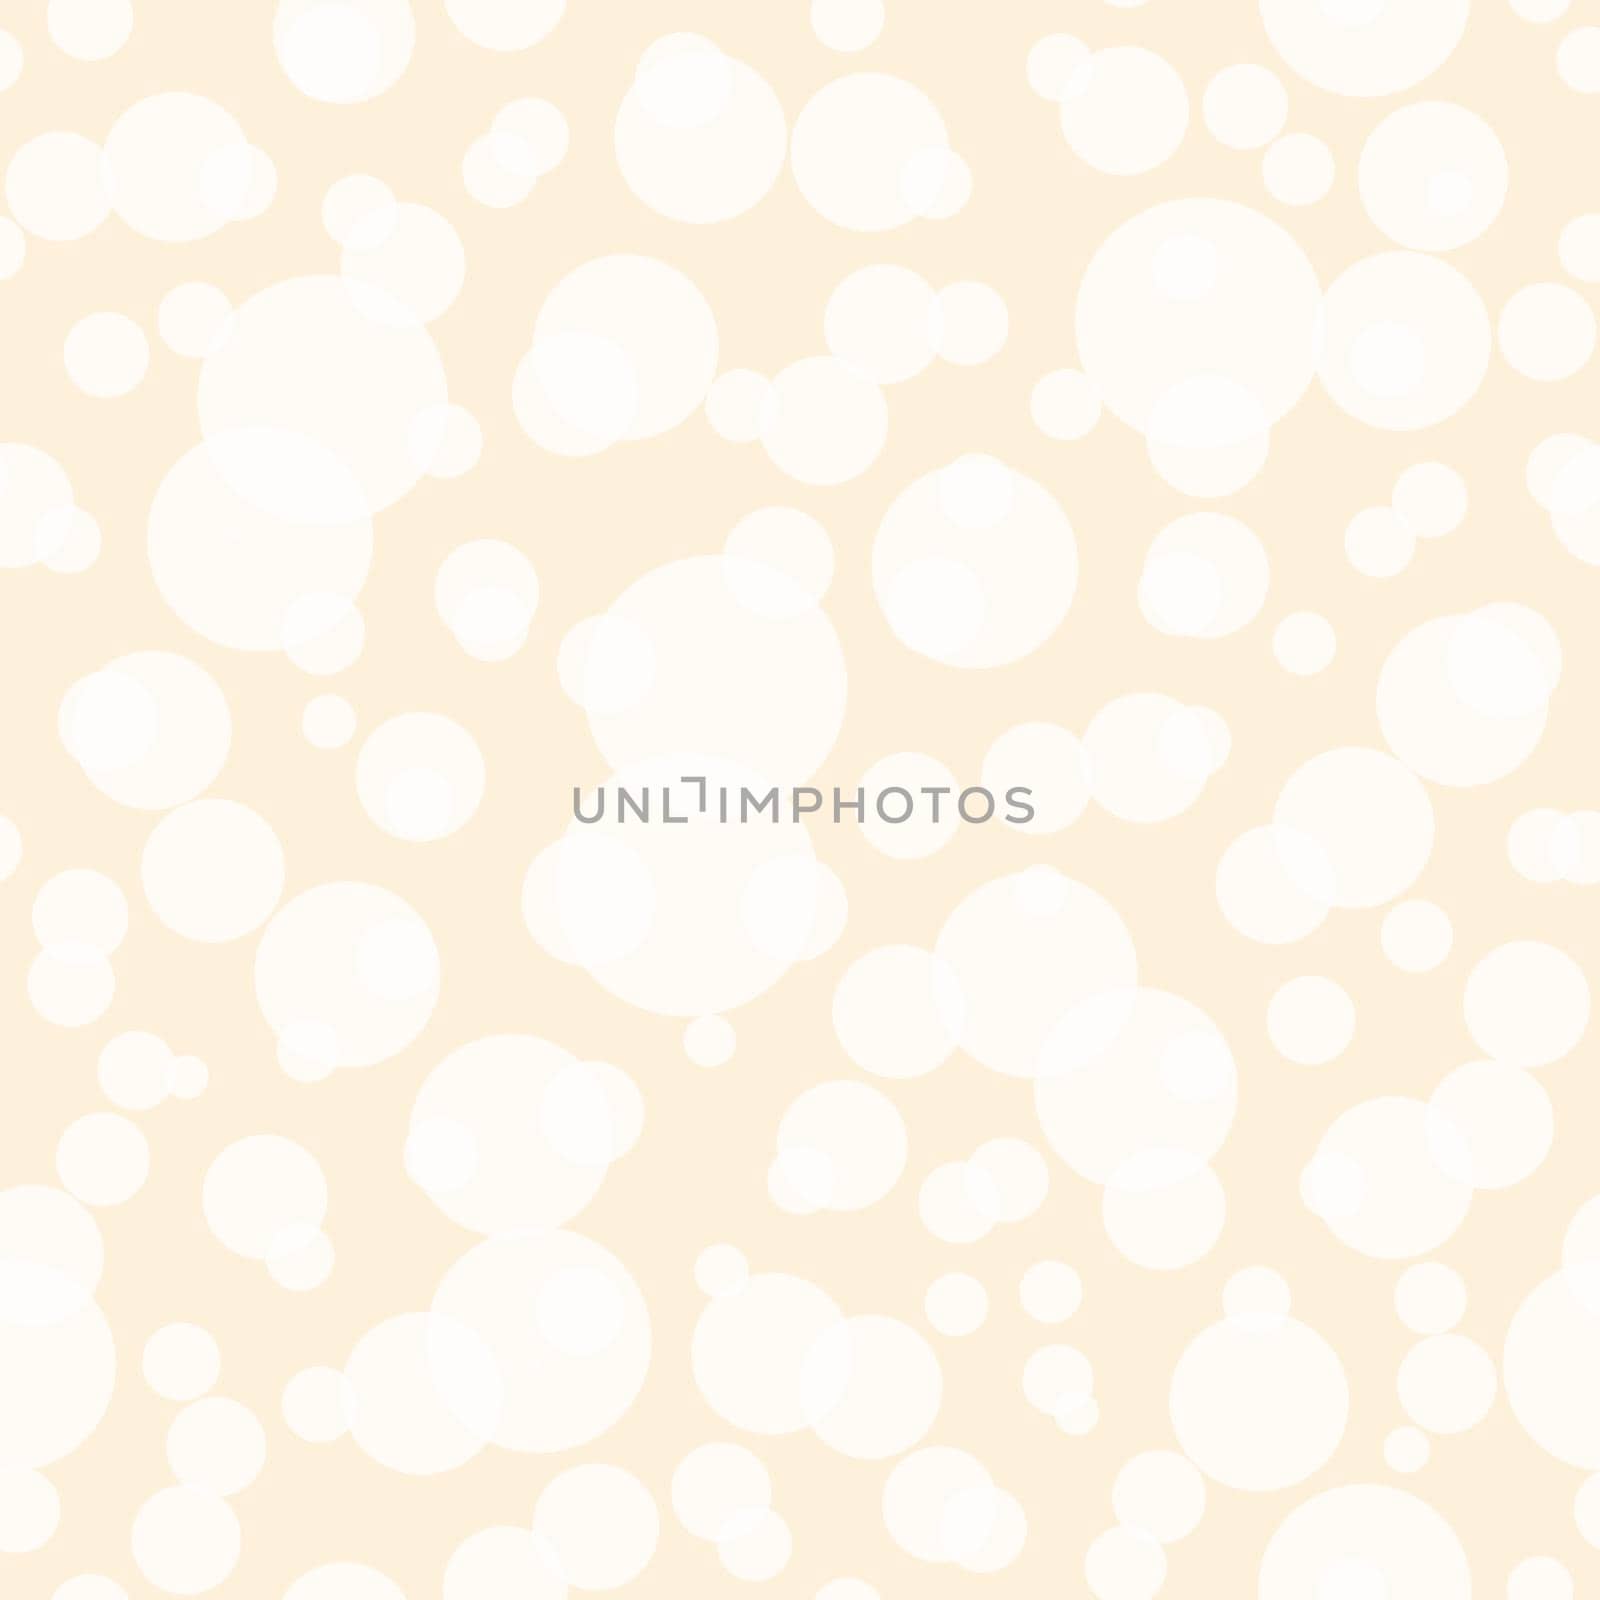 Abstract seamless pattern with monochrome balls.Illustration of overlapping dots pattern for background abstract.Polka dots ornament.Good for invitation,poster,card,flyer,banner,textile,fabric by Angelsmoon